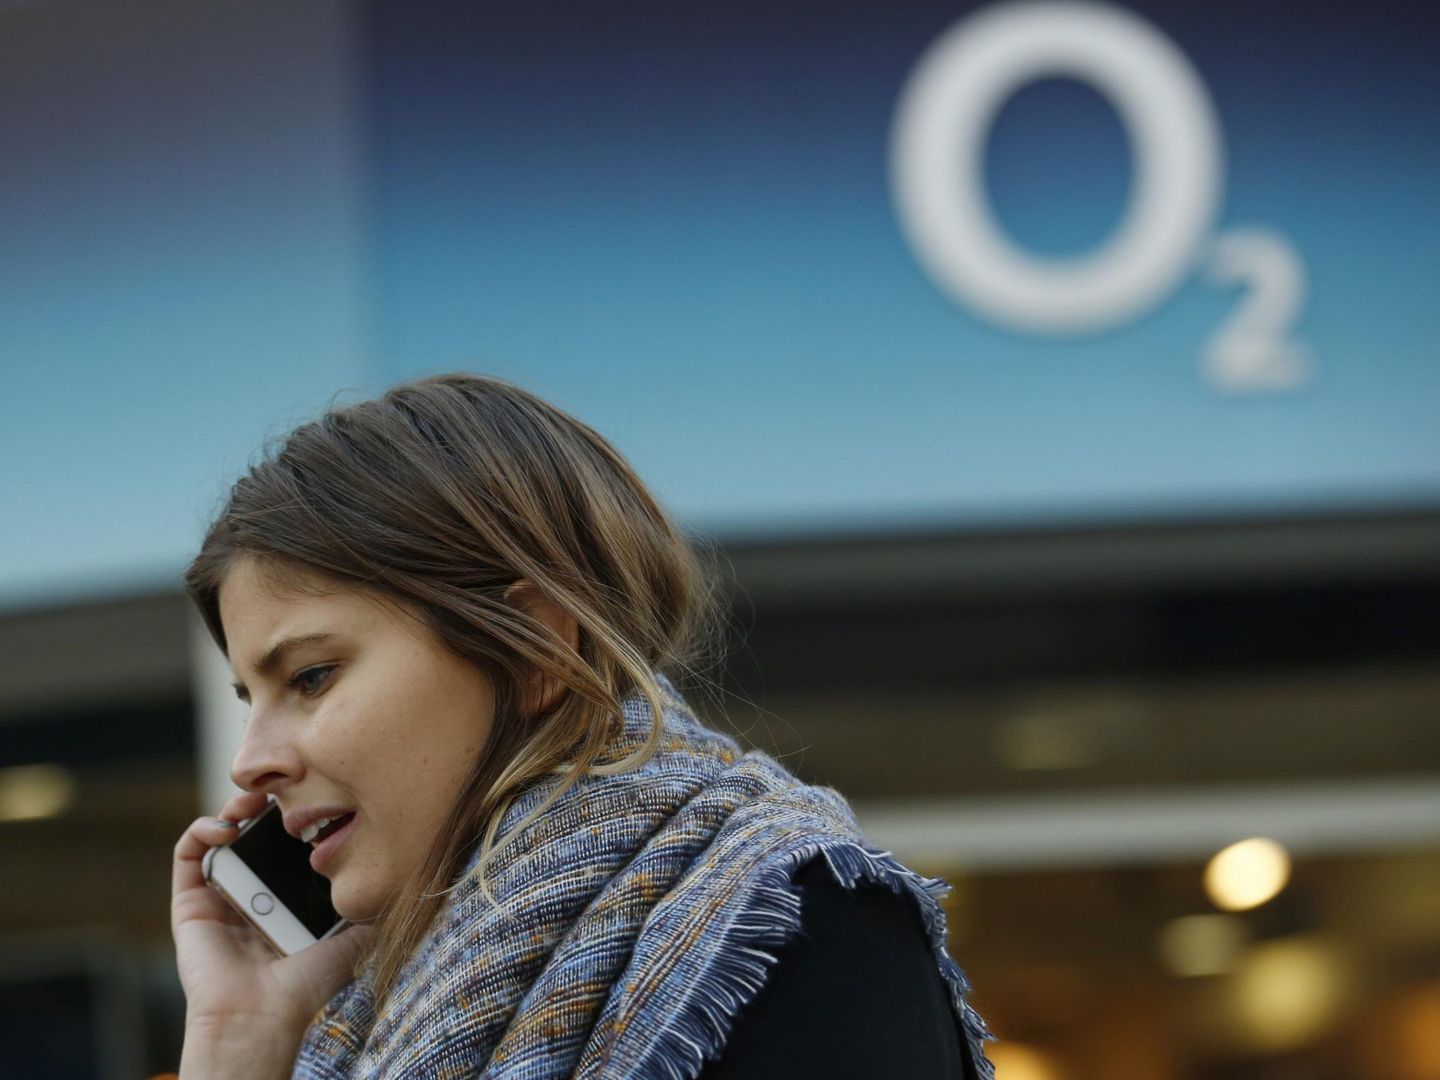 A woman speaks on a mobile telephone outside an O2 store in central London in this November 24, 2014 file photo. Li Ka-shing's Hutchison Whampoa Ltd has agreed to buy Telefonica's British mobile unit O2 for up to 10.25 billion pounds (.4 billion), as Asia's richest man makes his boldest bet yet to revamp his European telecoms business.  REUTERS/Luke MacGregor/Files  (BRITAIN - Tags: BUSINESS TELECOMS)